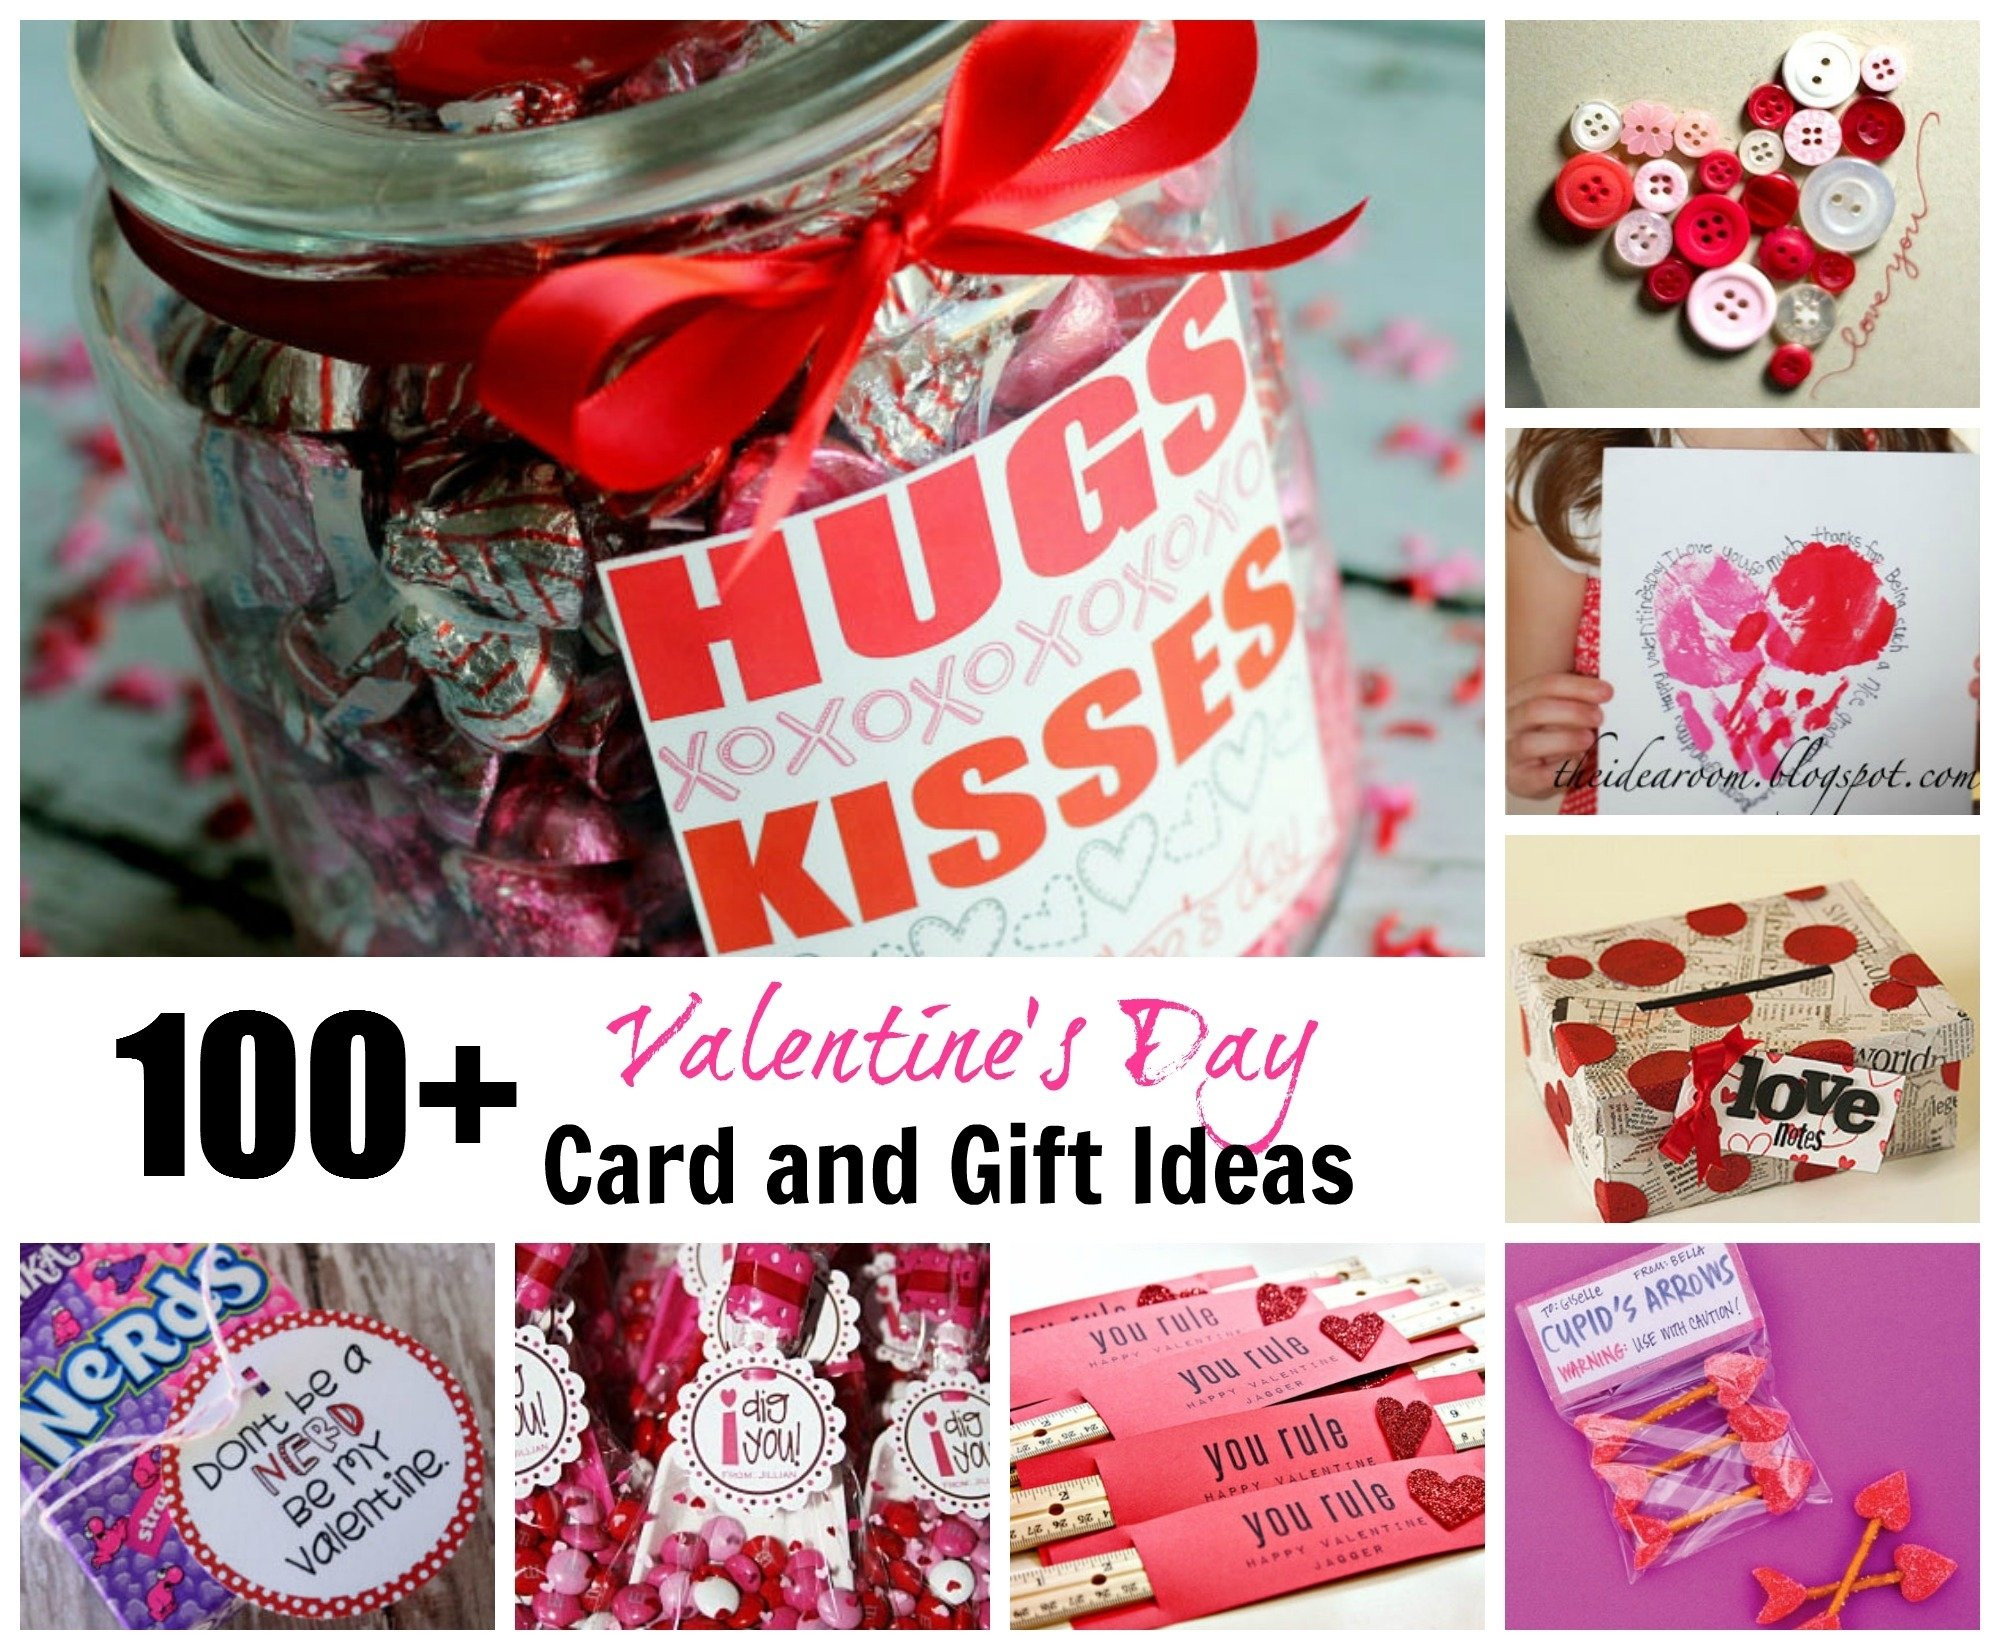 Homemade Valentines Day Gifts
 10 Lovable Homemade Valentines Ideas For Him 2020